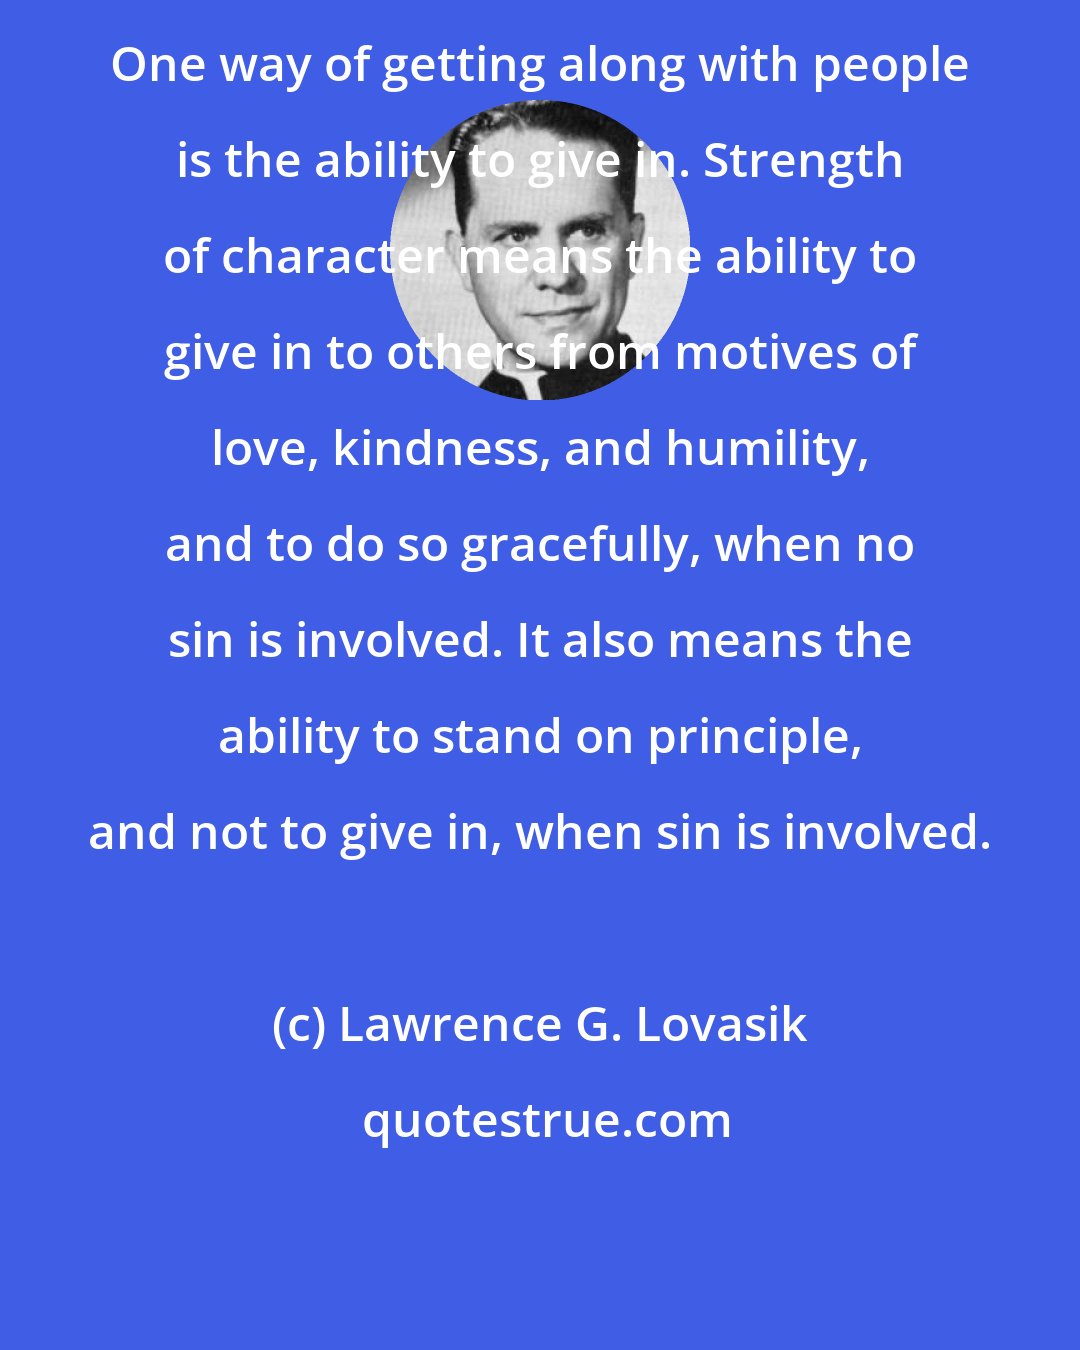 Lawrence G. Lovasik: One way of getting along with people is the ability to give in. Strength of character means the ability to give in to others from motives of love, kindness, and humility, and to do so gracefully, when no sin is involved. It also means the ability to stand on principle, and not to give in, when sin is involved.